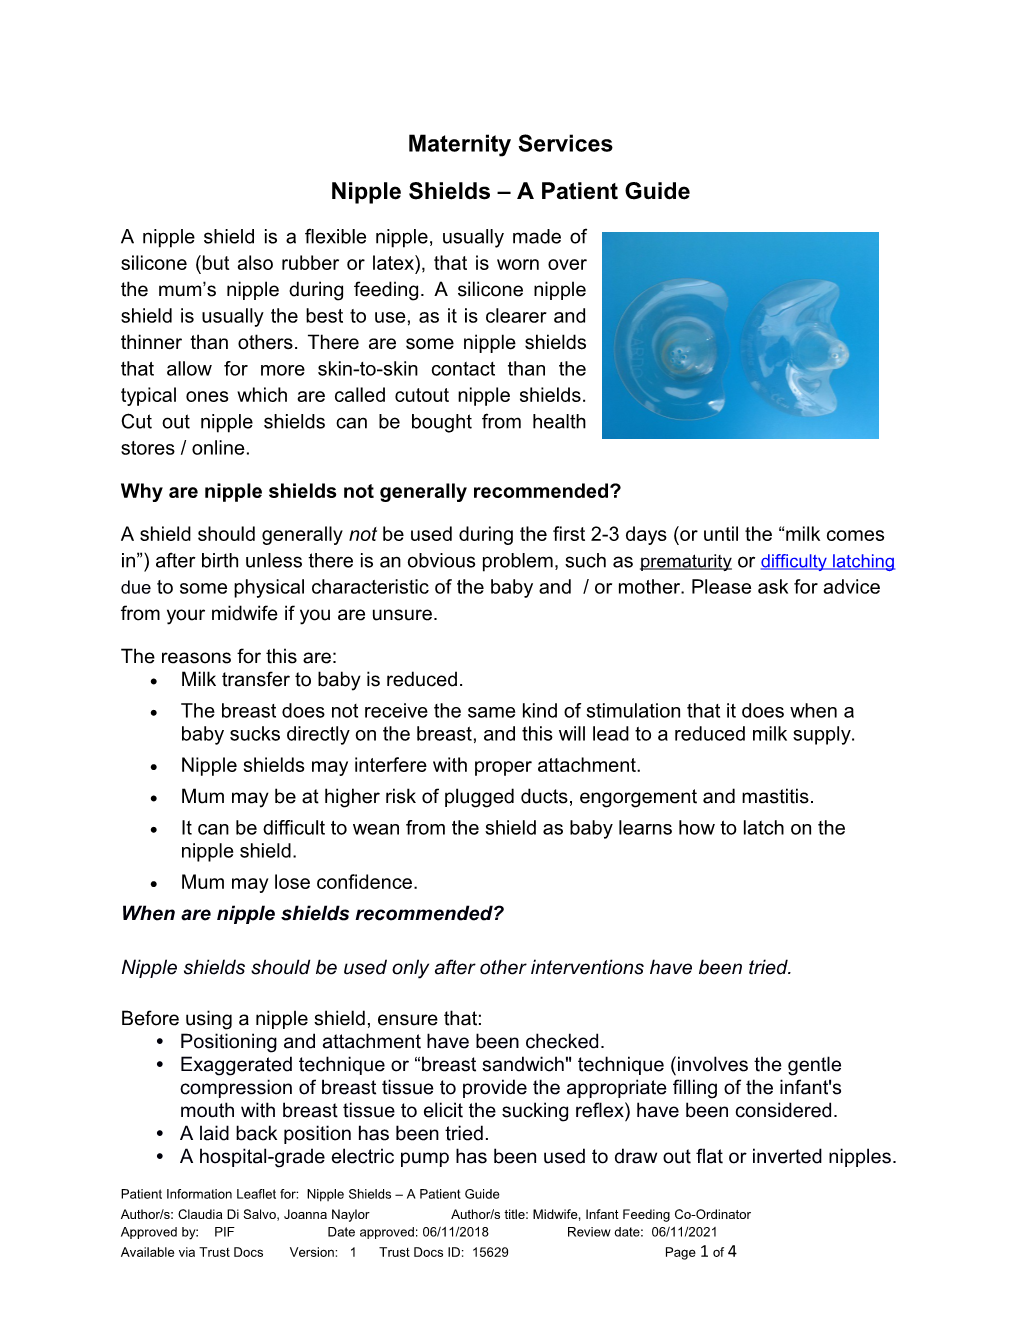 Maternity Services Nipple Shields – a Patient Guide